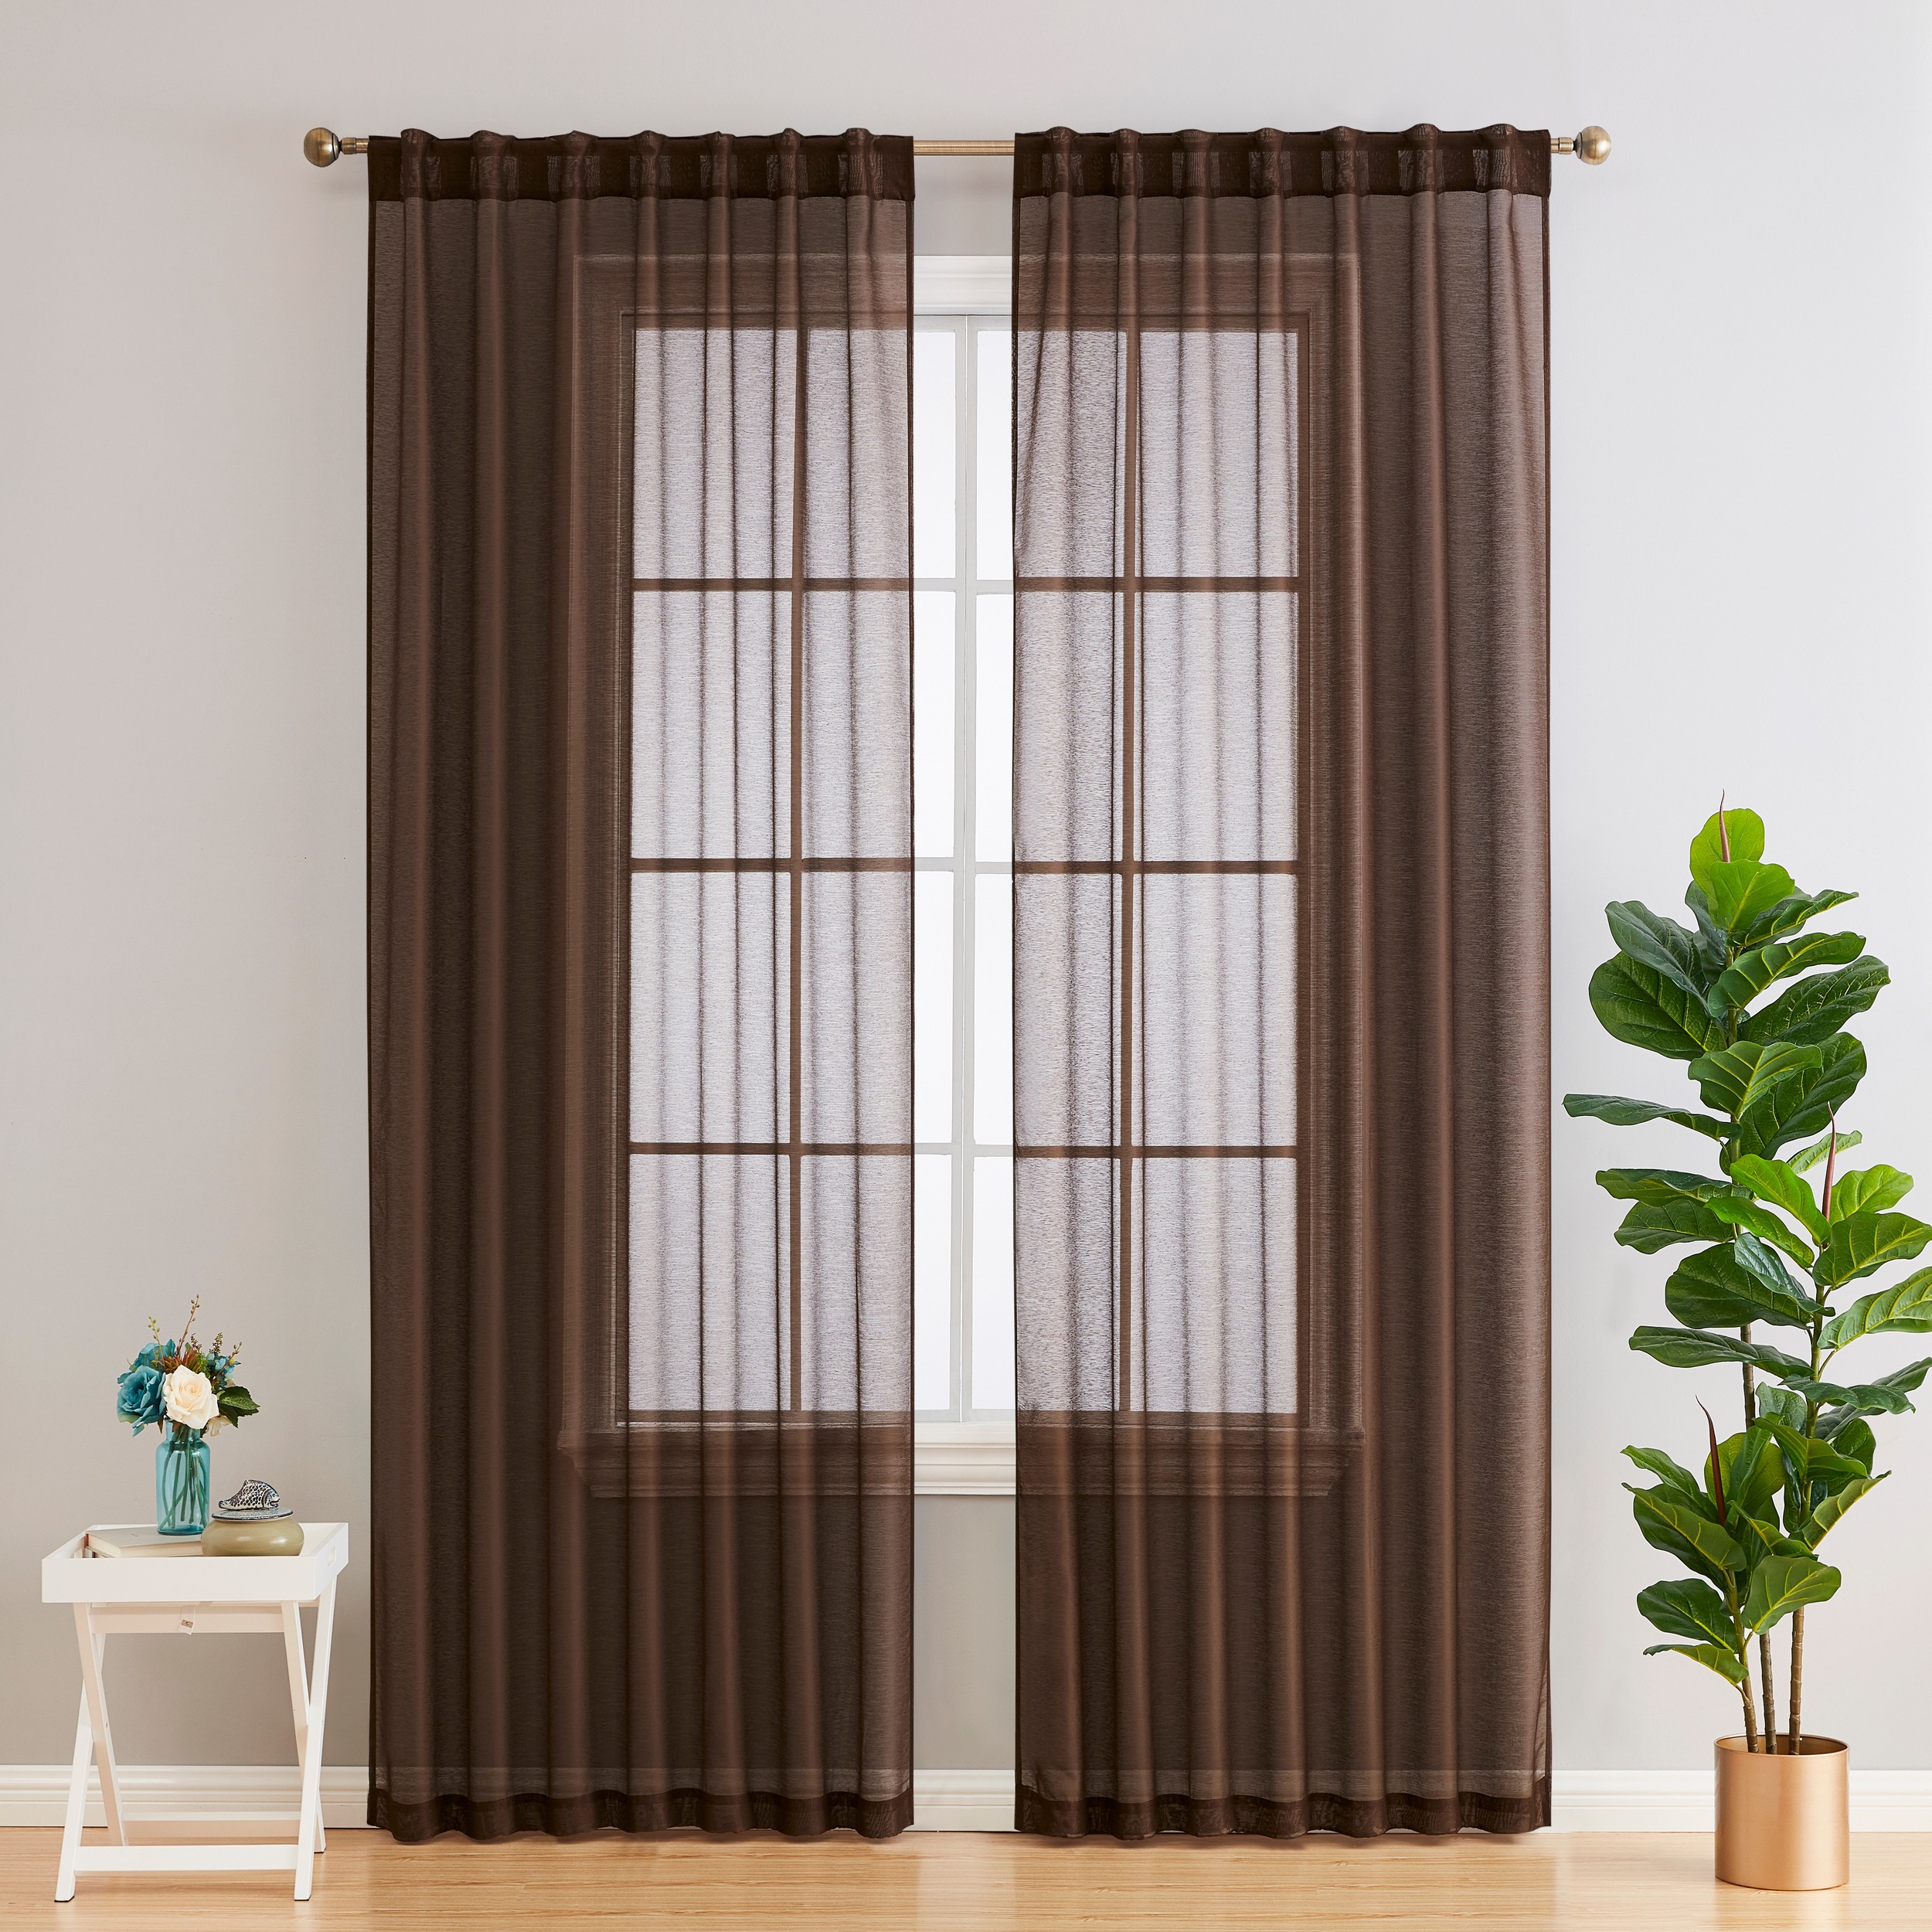 Hlc Me 72 In Chocolate Brown Semi Sheer Rod Pocket Curtain Panel Pair The Curtains Ds Department At Lowes Com